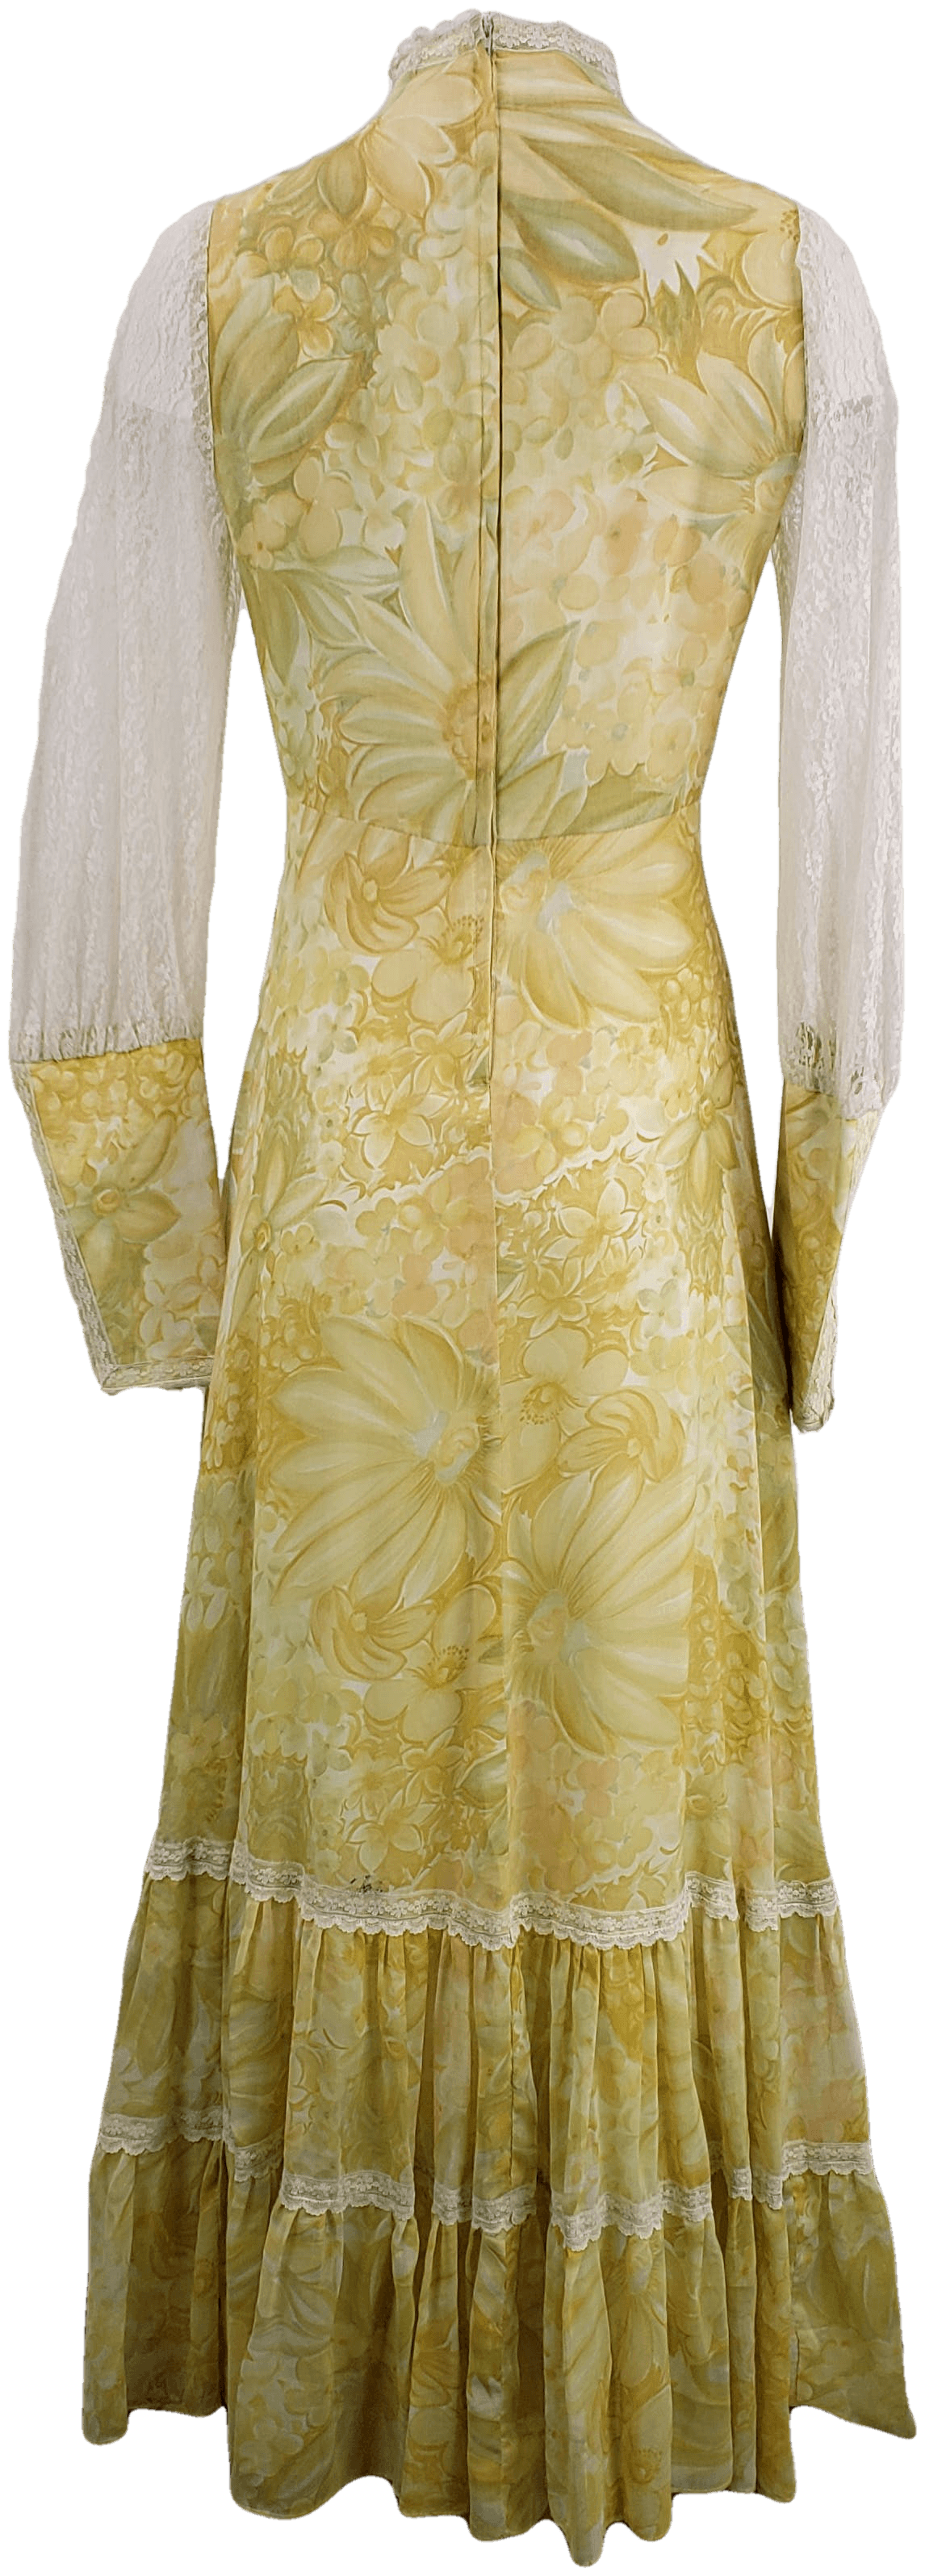 Vintage Yellow High Collar Dress with Lace Sleeves by Gunne Sax | Shop ...